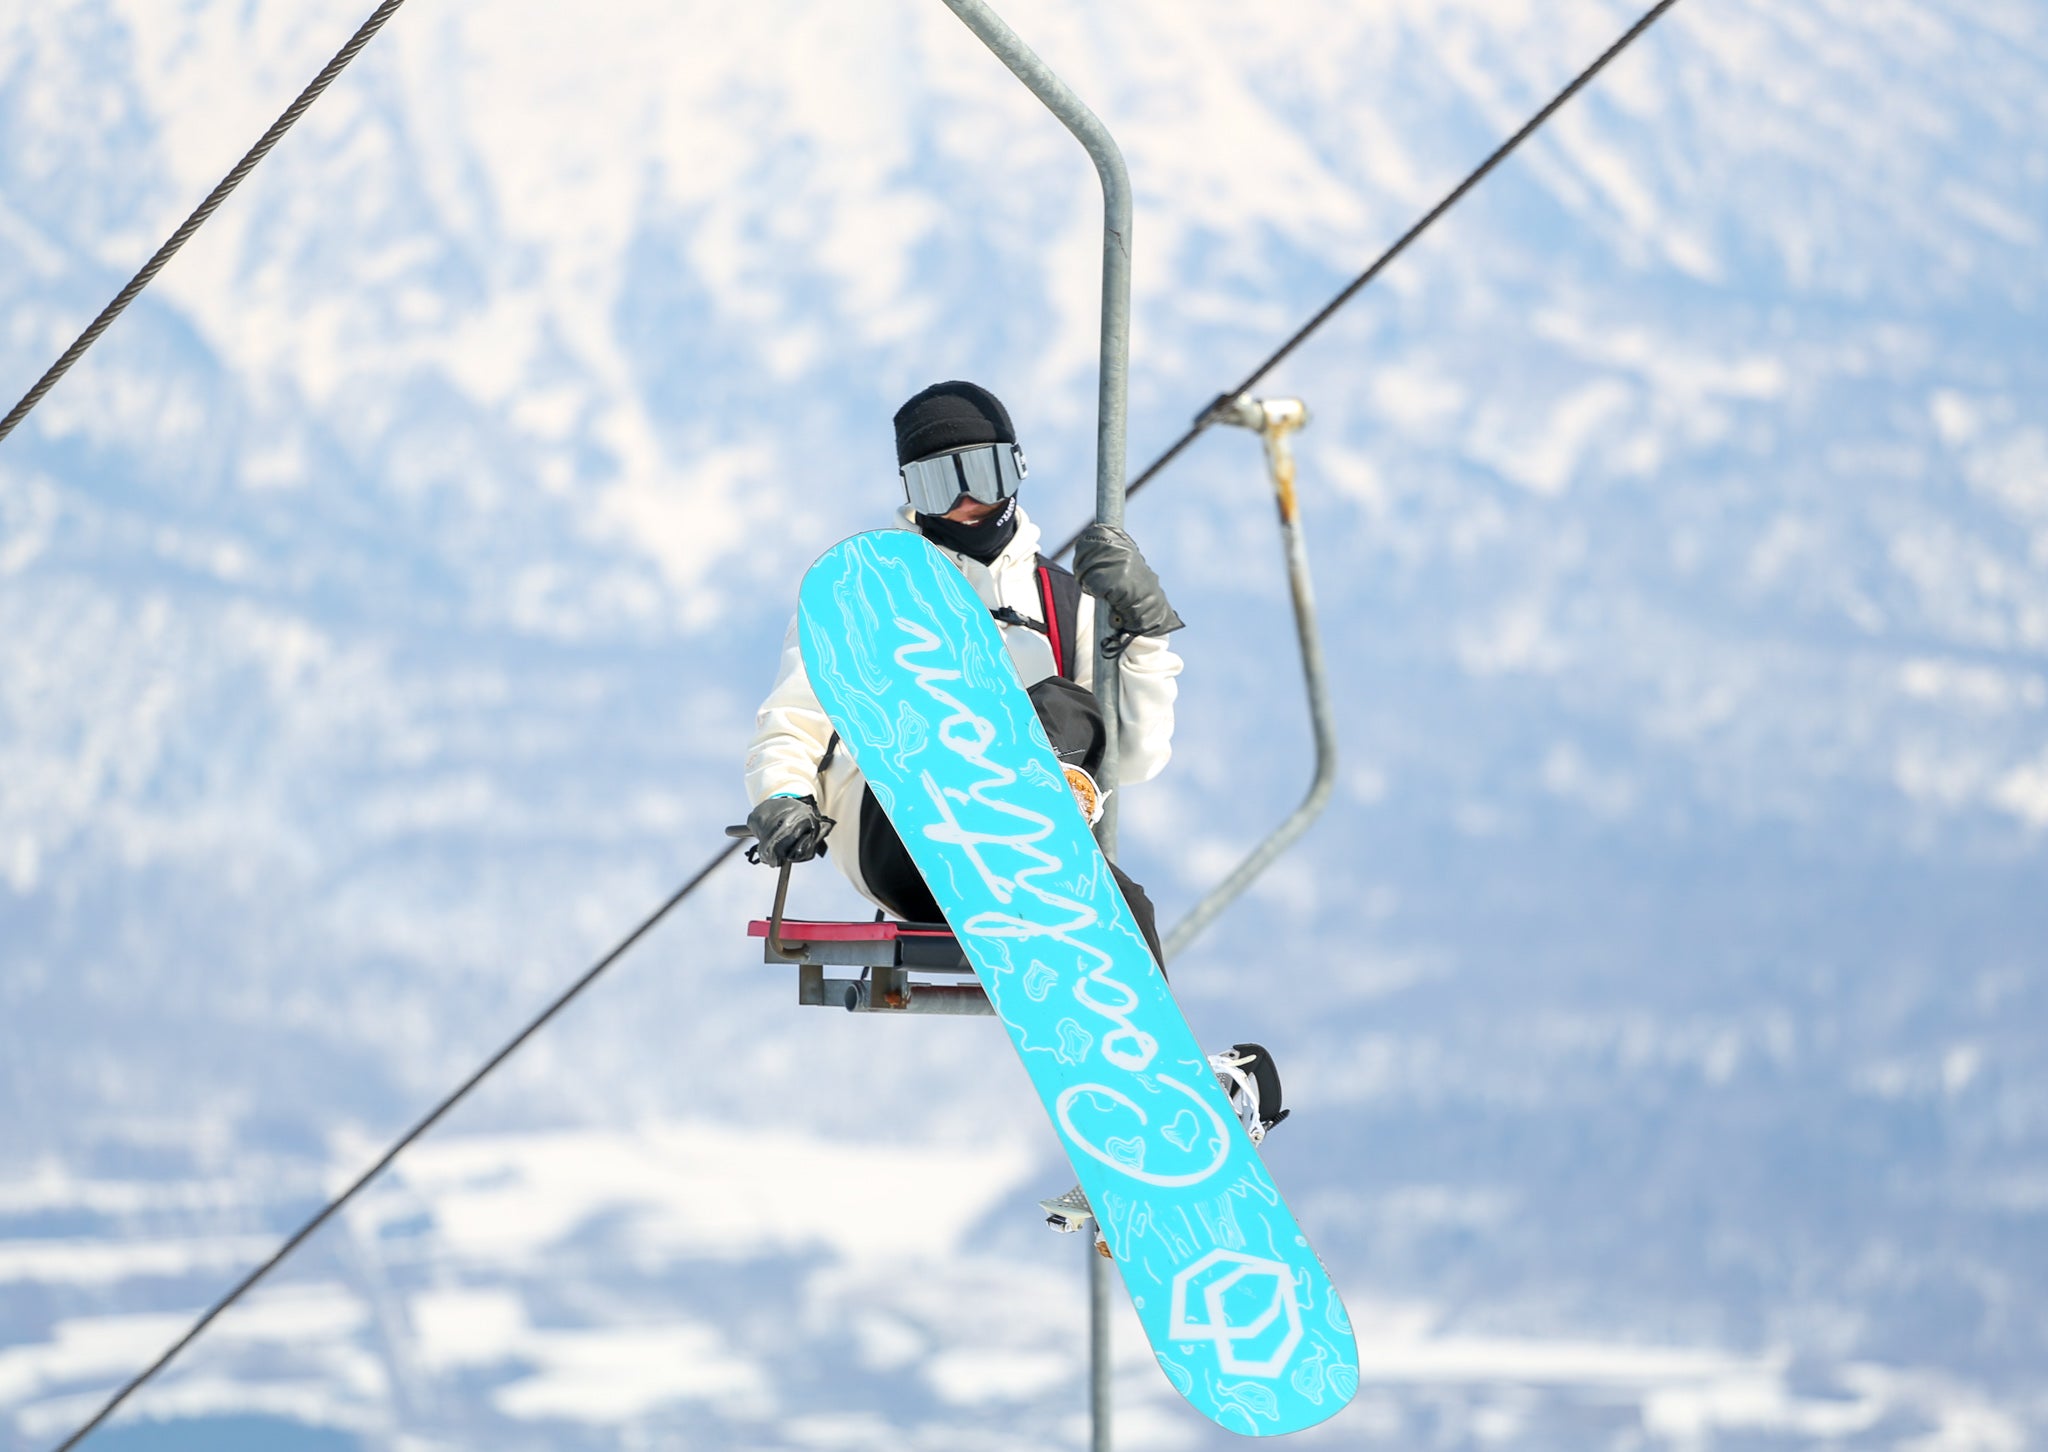 How To Choose The Best Snowboard: Coalition Snowboard Reviews By “The Good Ride”